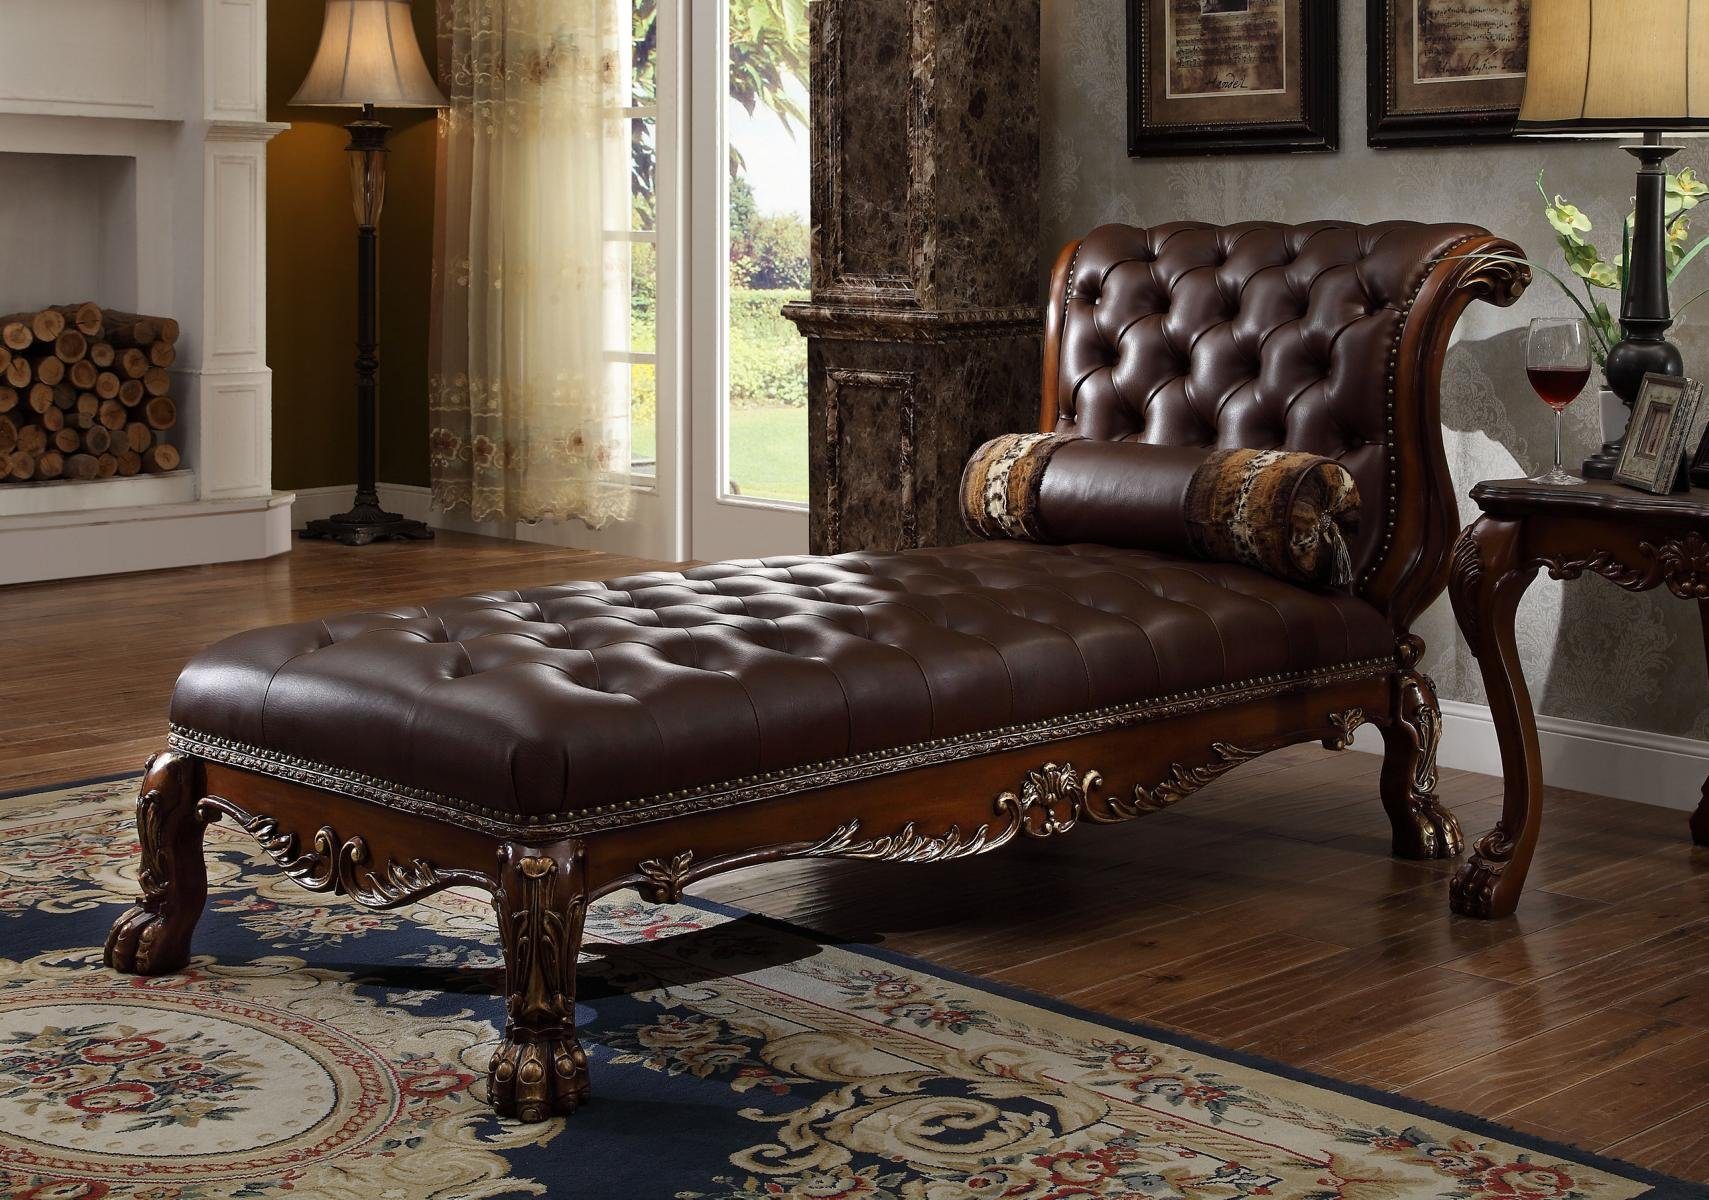 JVmoebel Chaiselongue Chesterfield Chaiselongue Chaise Liege Sofa mane Made Europe in Couch